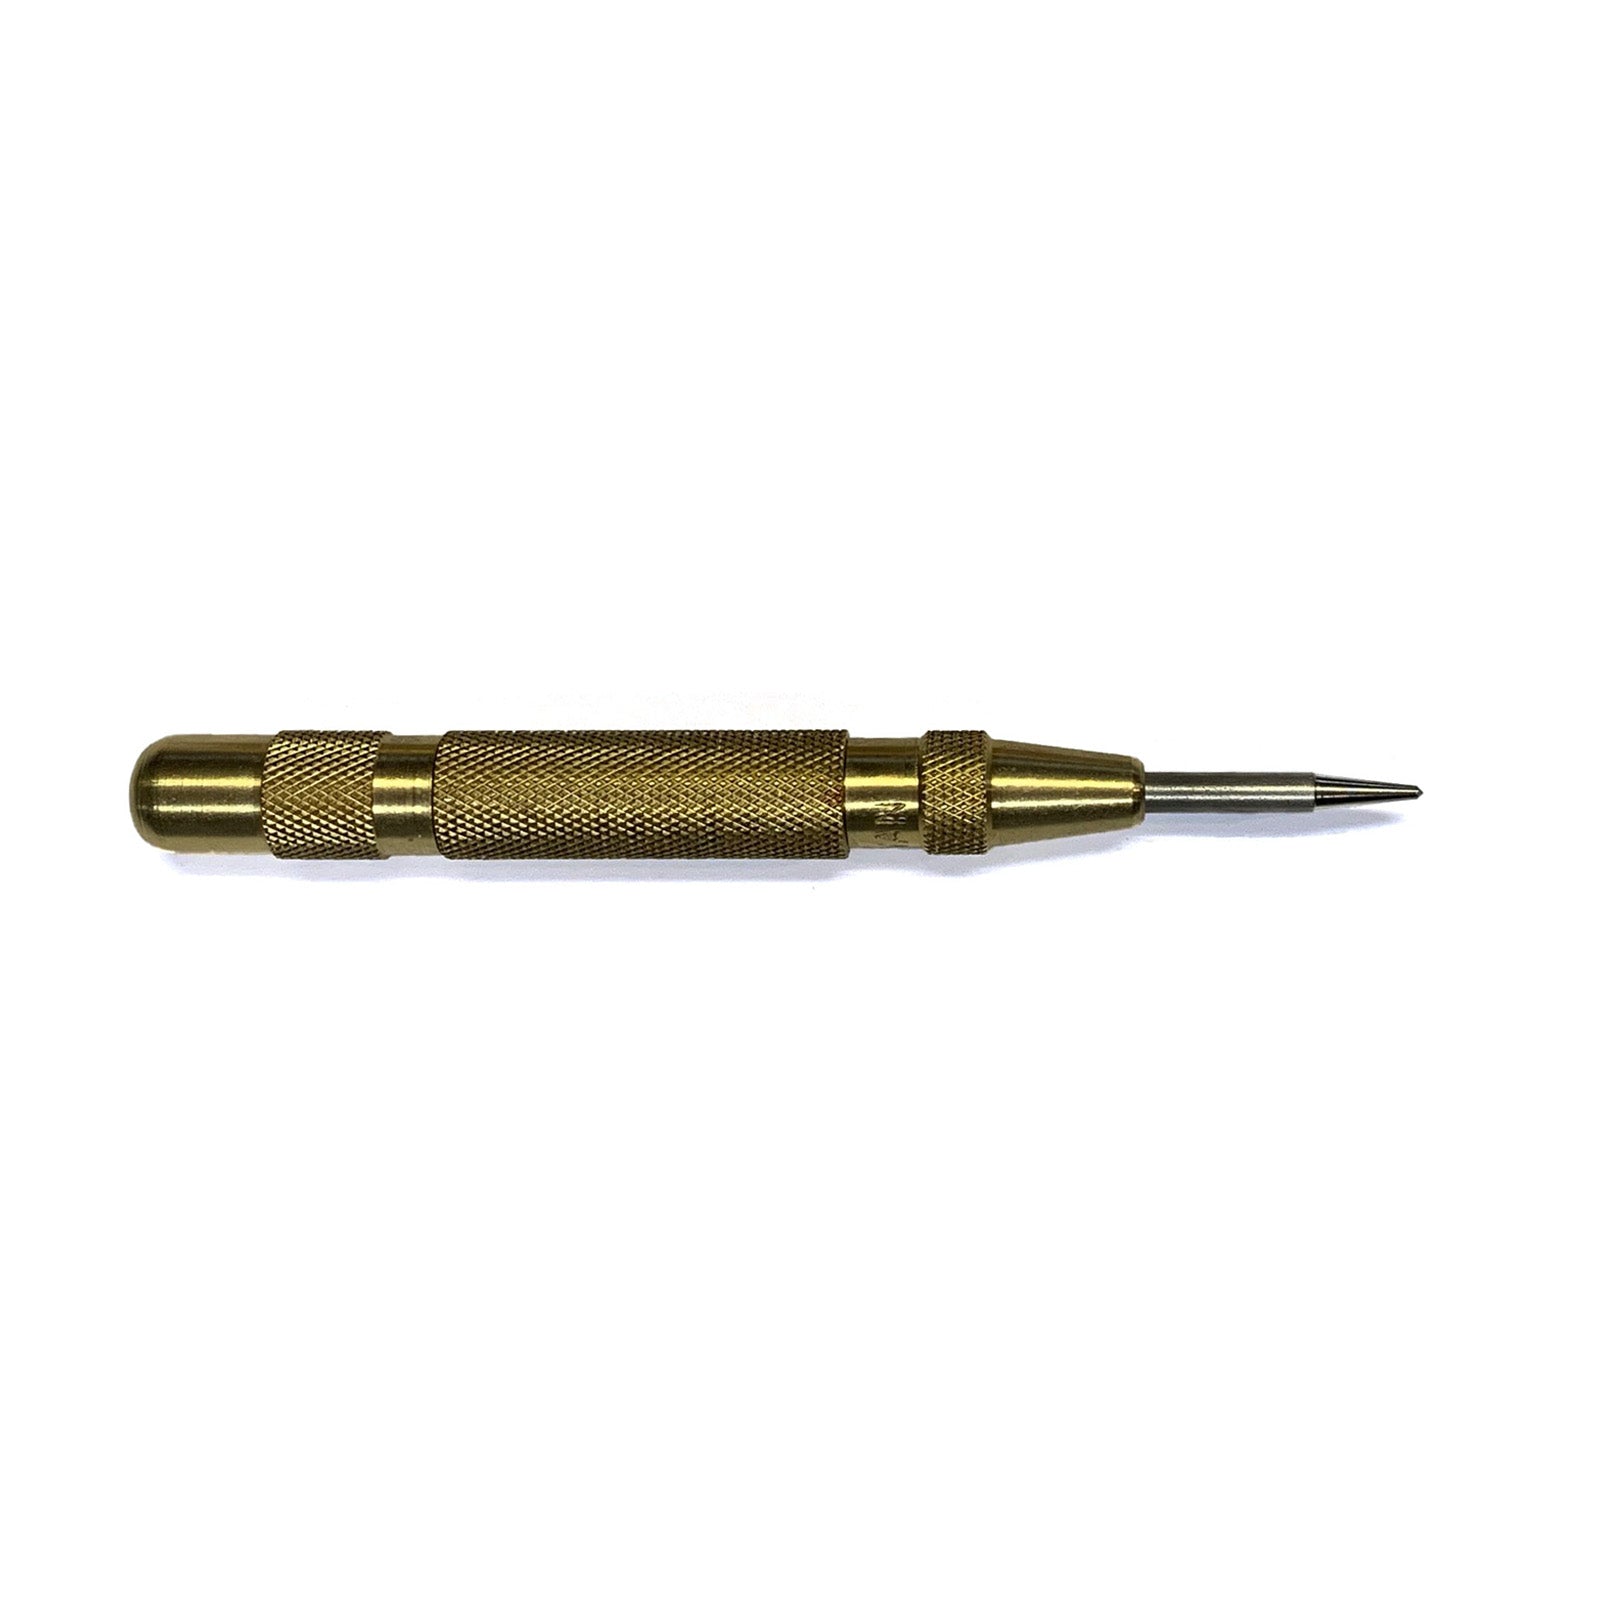 4¾ Automatic Center Punch